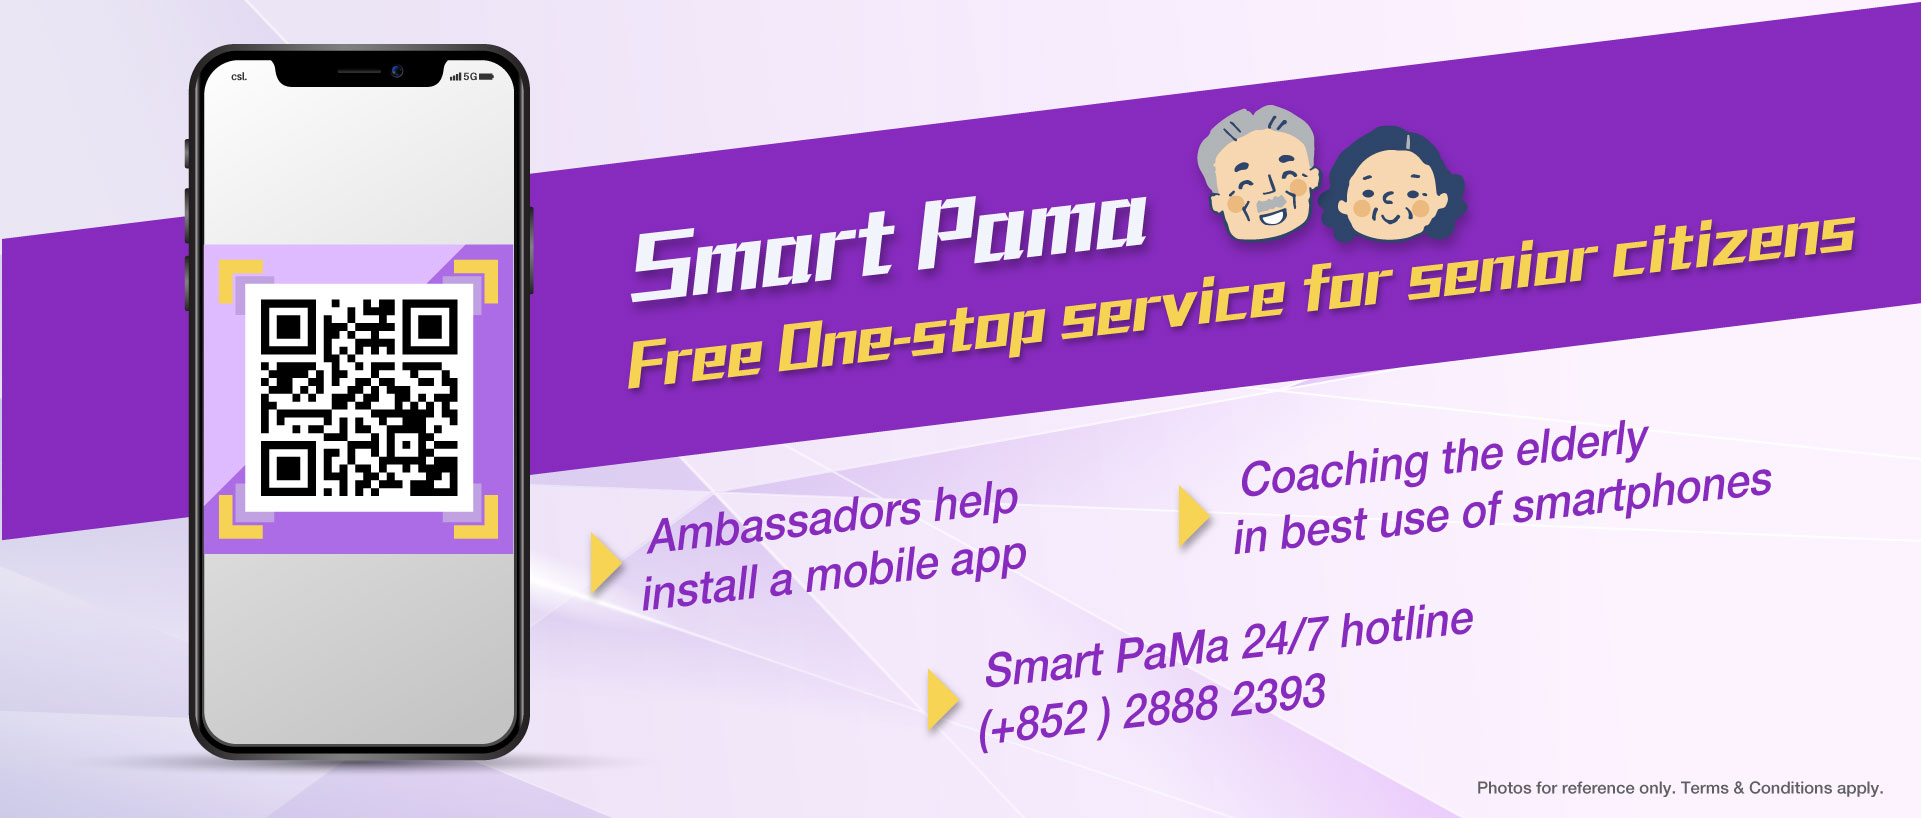 Smart PaMa - Free One-stop service for senior citizens. Ambassadors help install a mobile app. Coaching the elderly in best use of smartphones. Smart PaMa 24/7 hotline (852) 2888 2393.